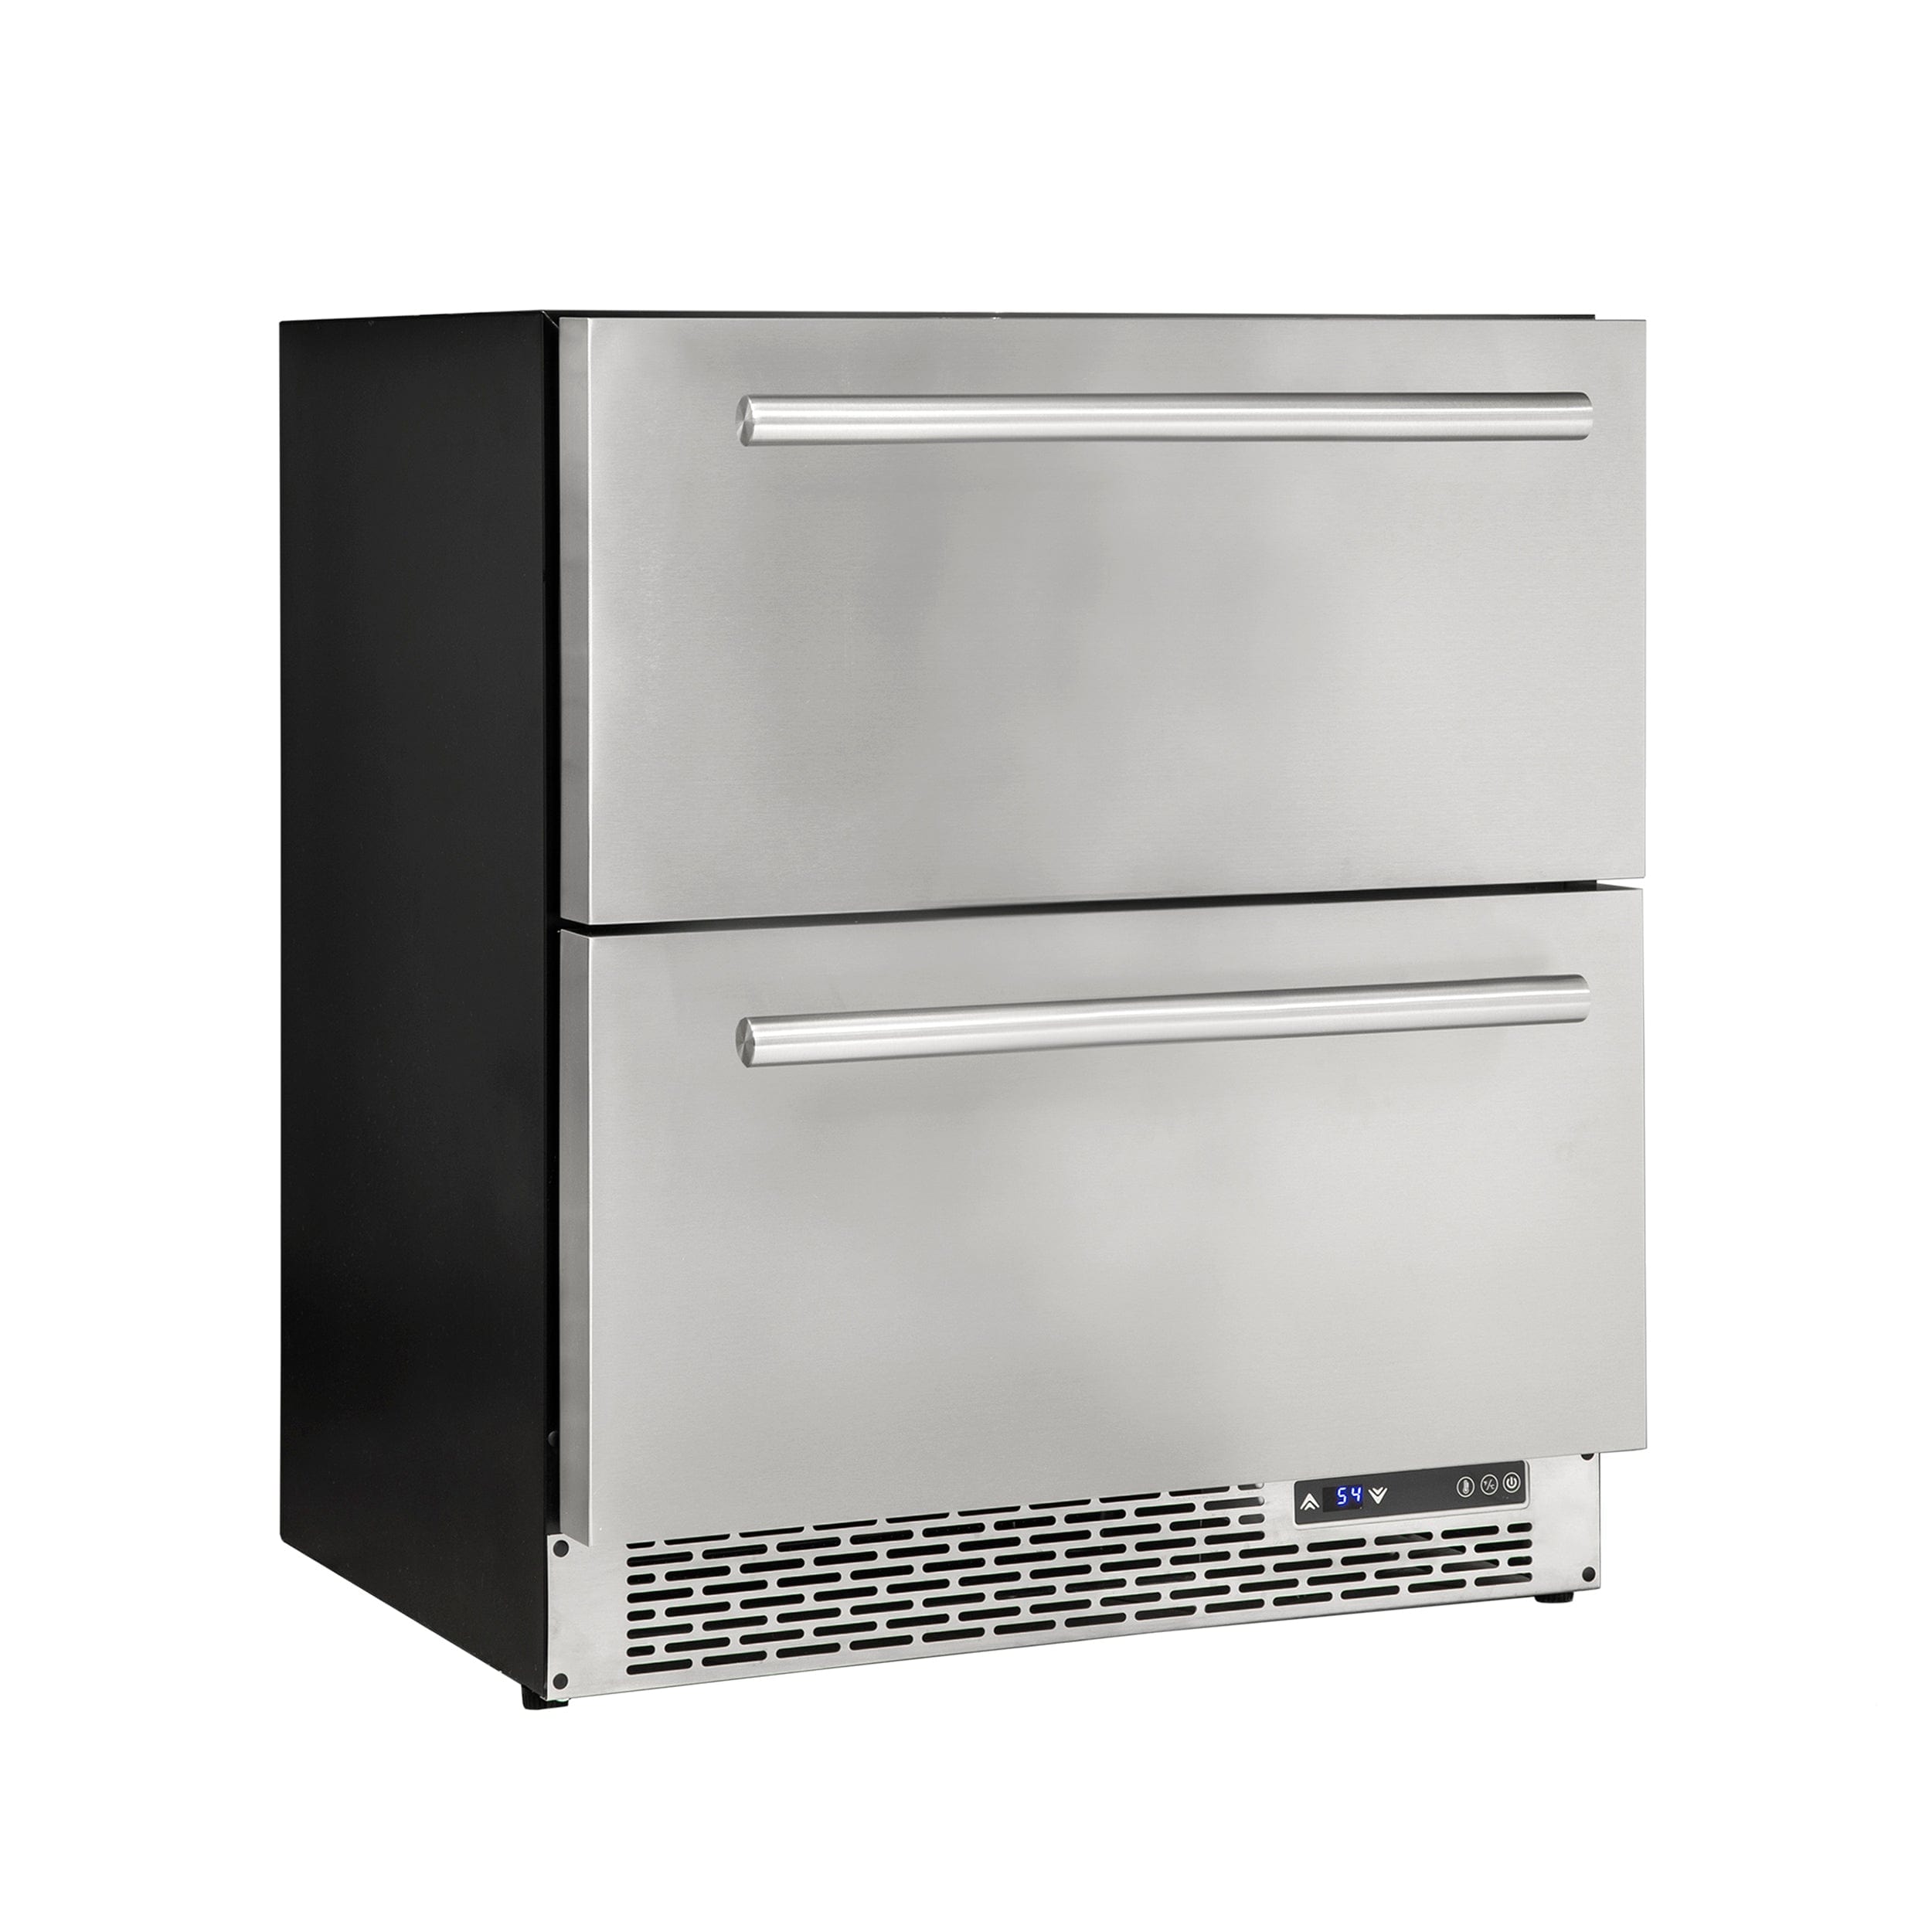 Forno Cologne 30" Stainless Steel Drawer Freezer FDRBI1876-30 Wine Coolers Empire